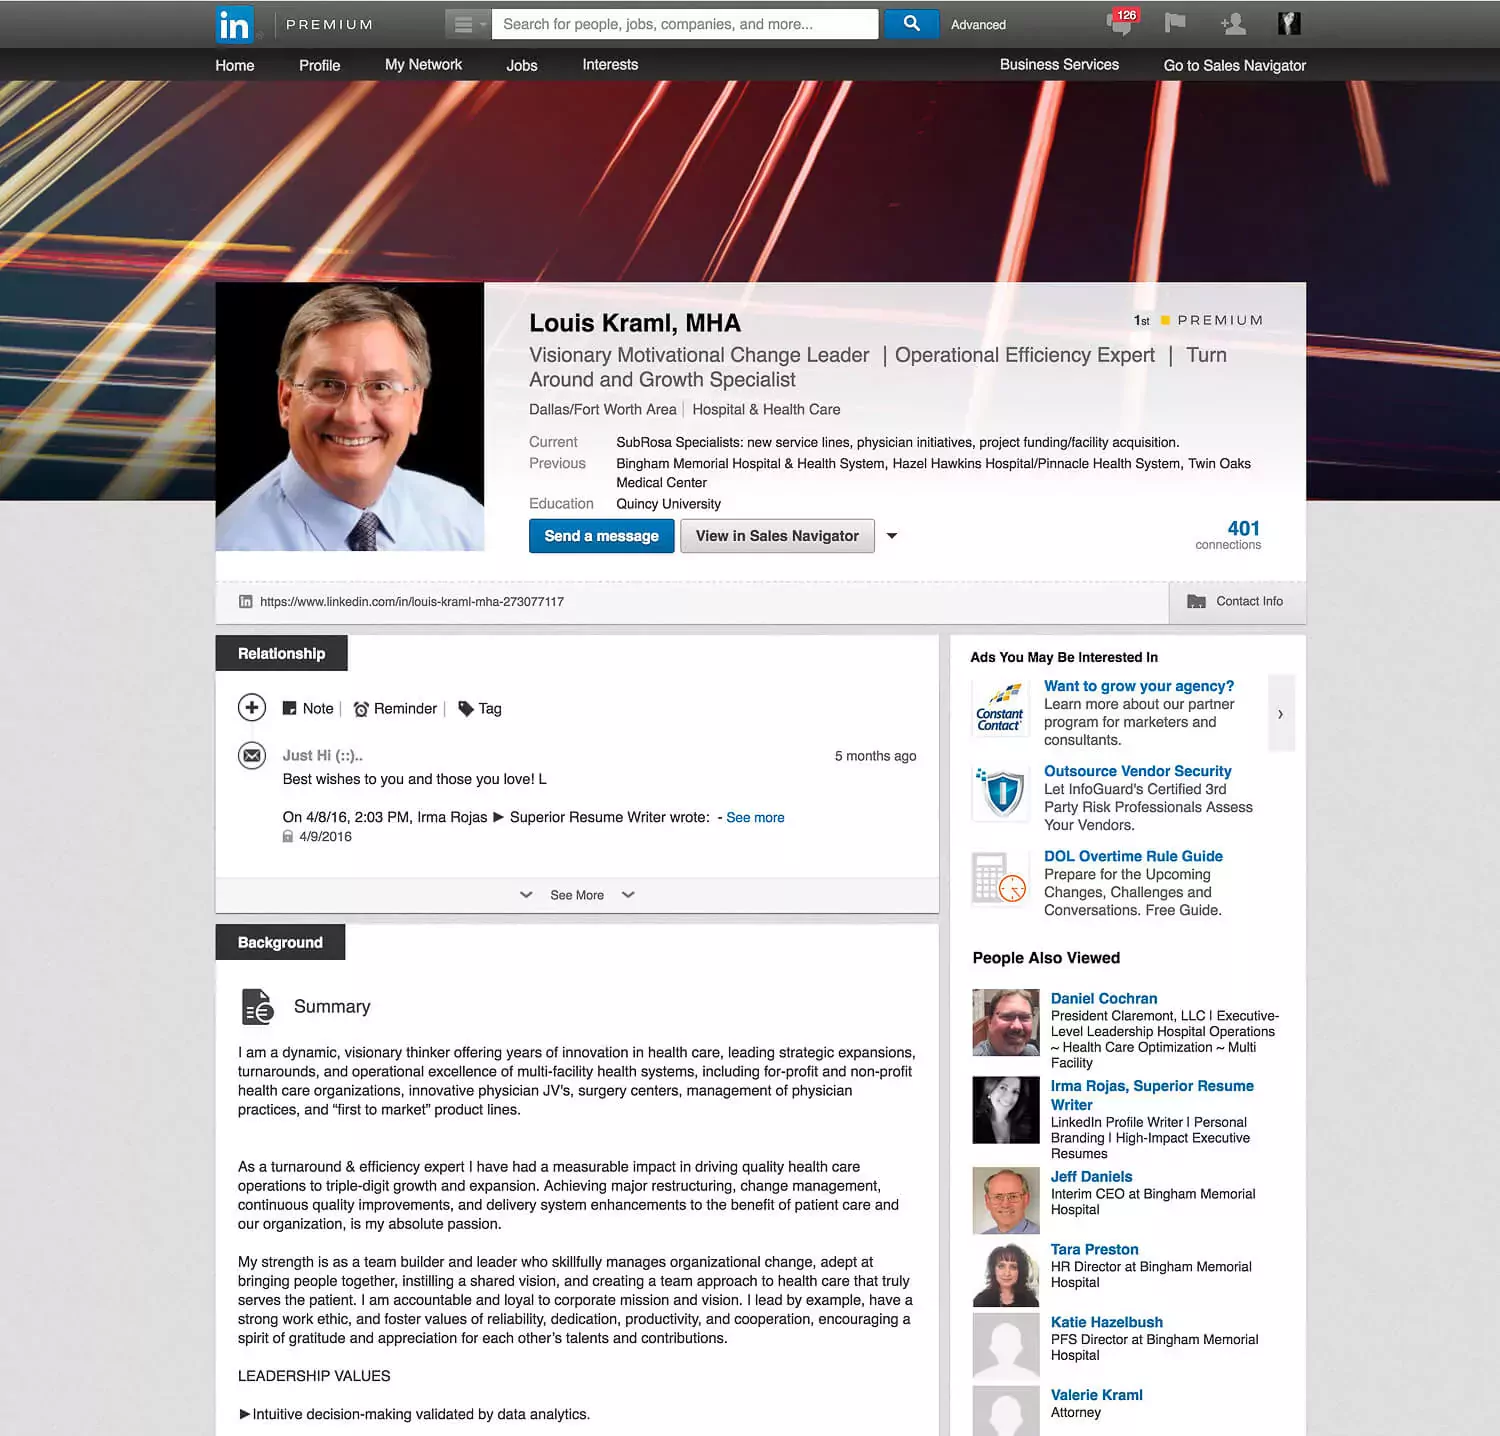 Louis_Kraml__MHA___LinkedIn_and_Adobe_Photoshop_CC_2015_and_SAMPLES_FOR_WEB_SITE_FINAL